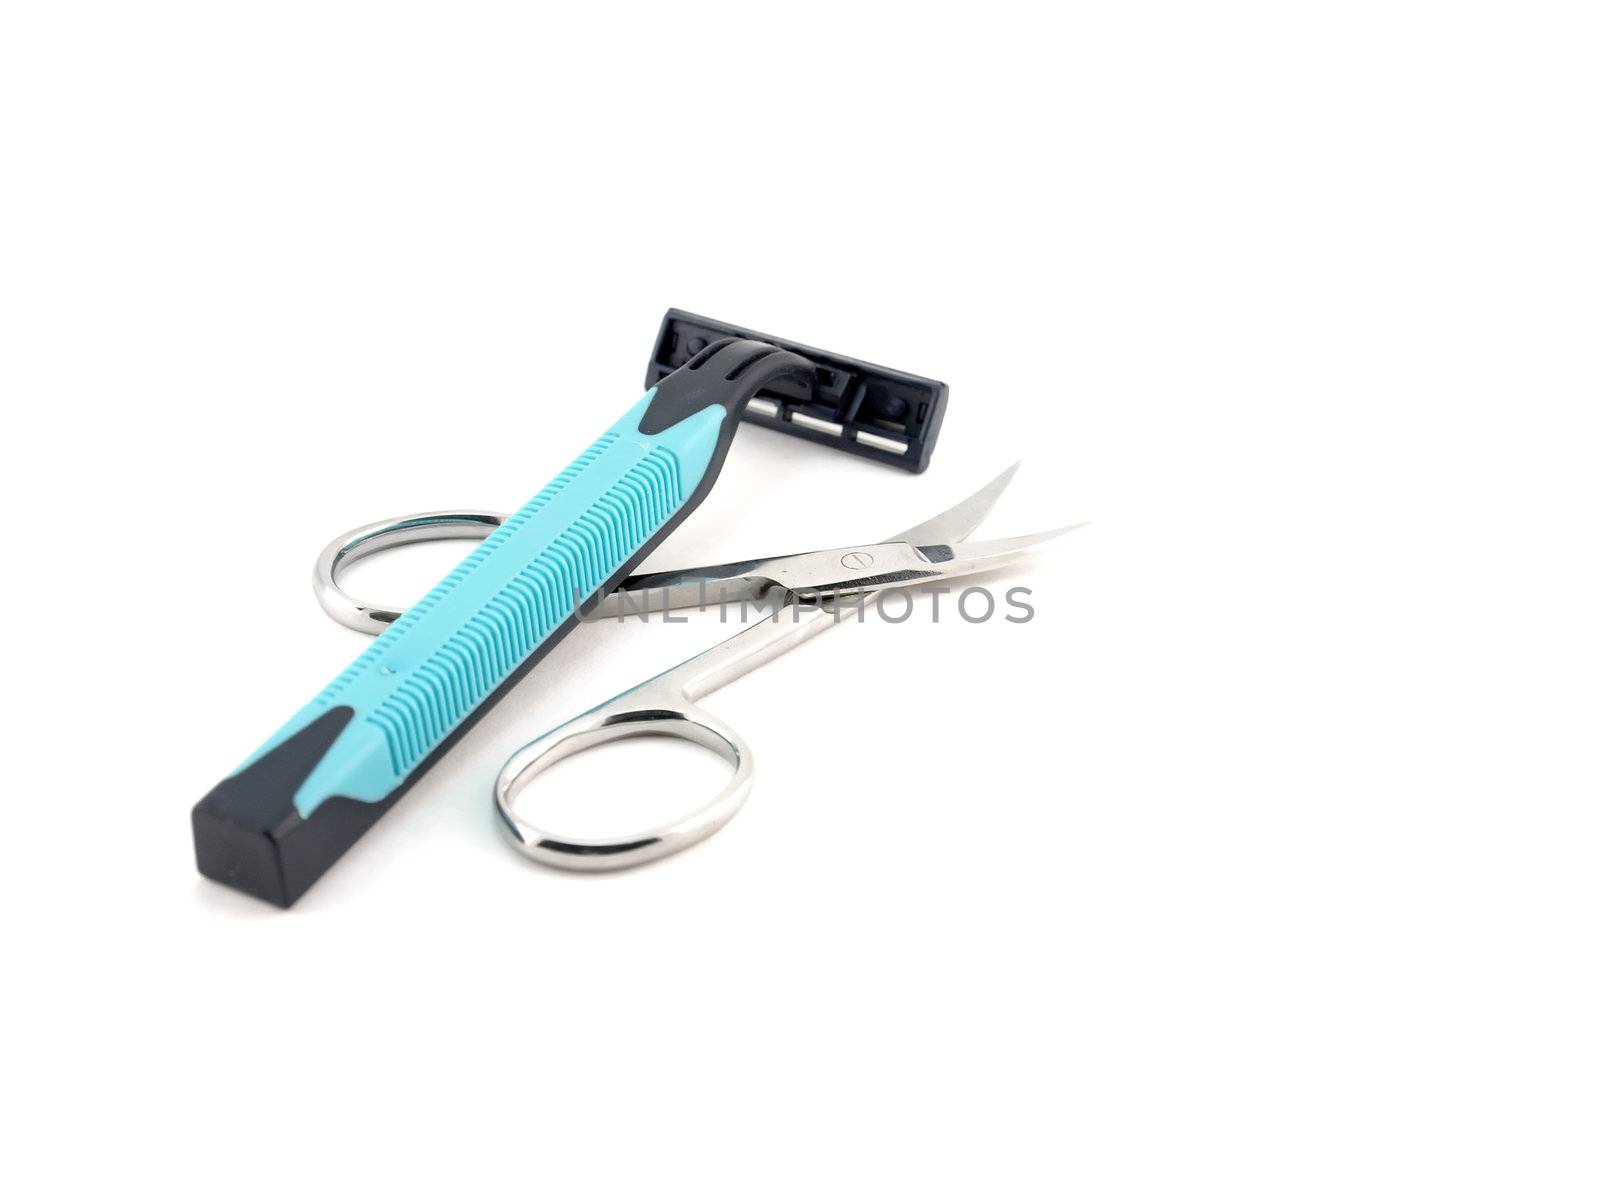 Shaving-set and nail scissors by sergpet